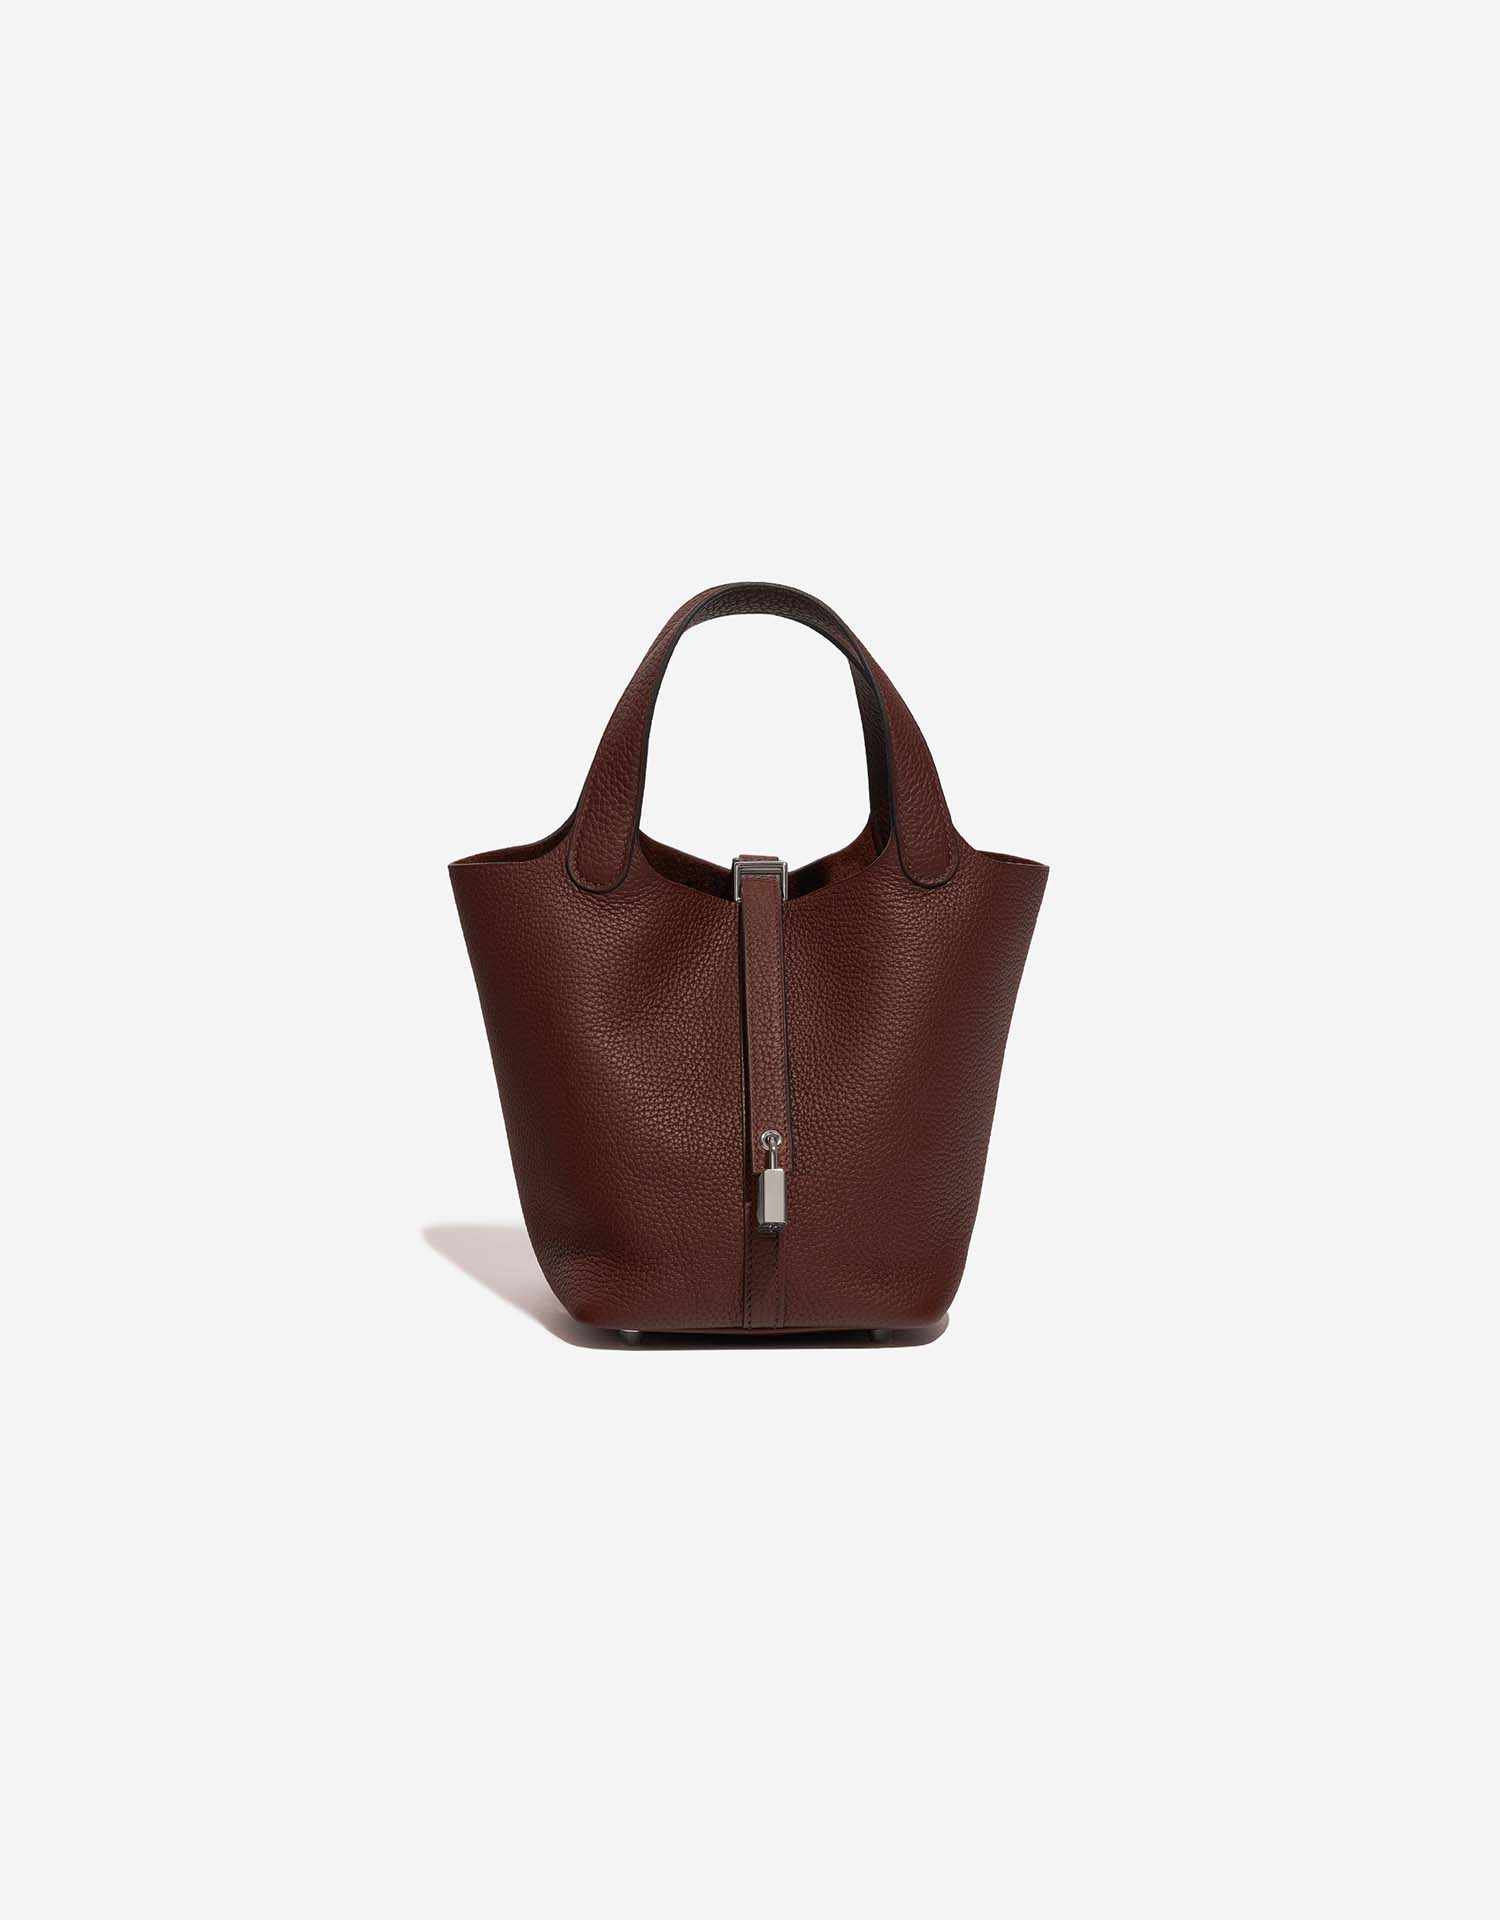 Hermès Picotin 18 Clemence Rouge Sellier